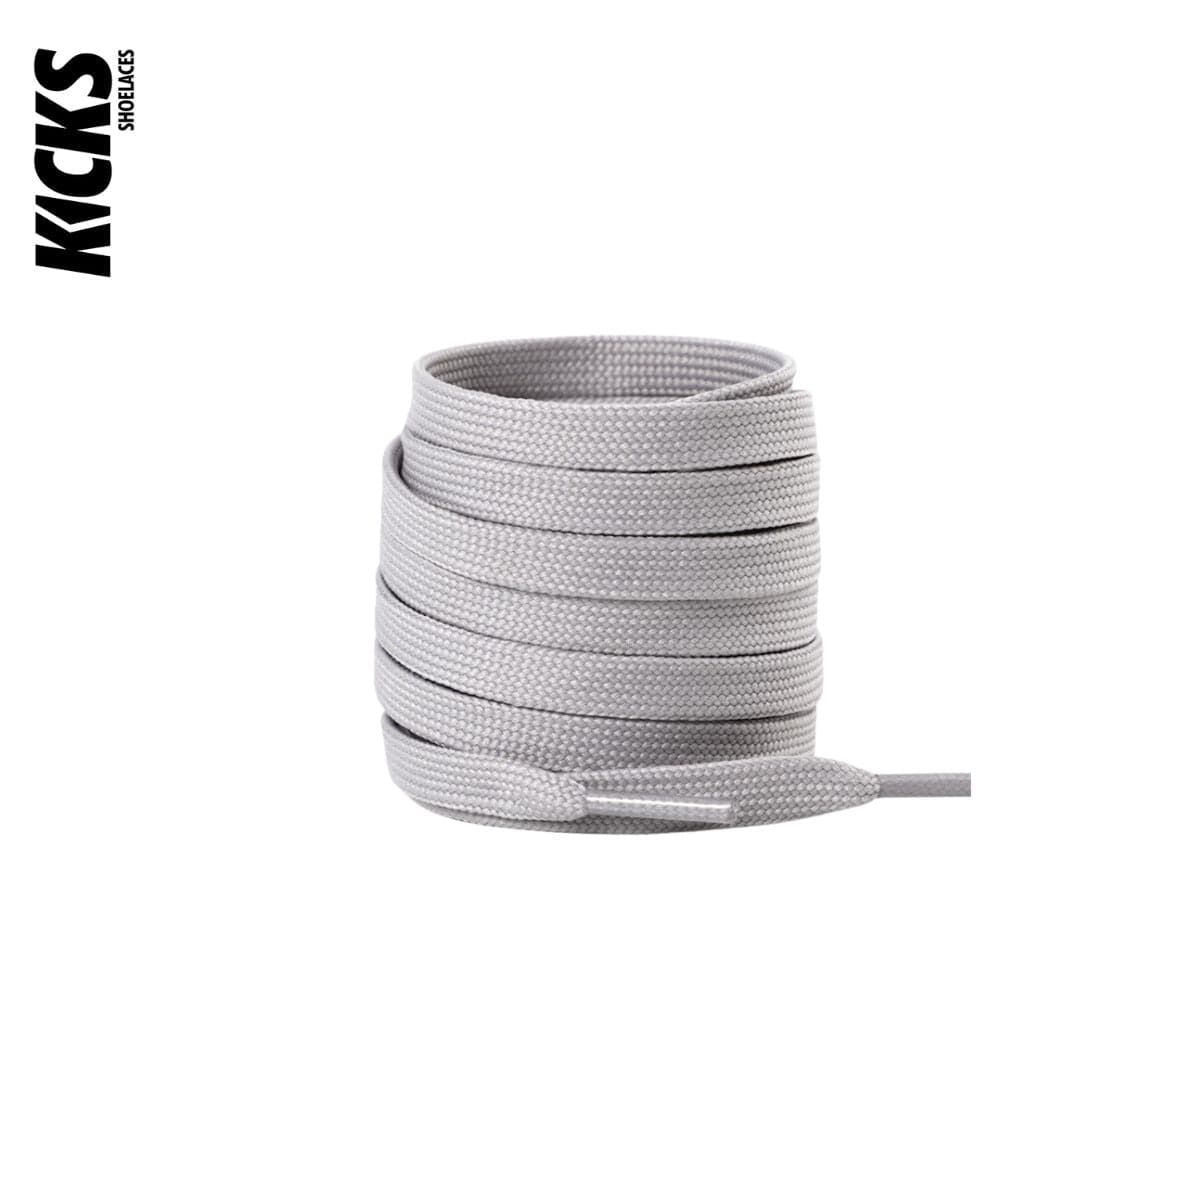 Light Grey Replacement Laces for Adidas EQT Sneakers by Kicks Shoelaces